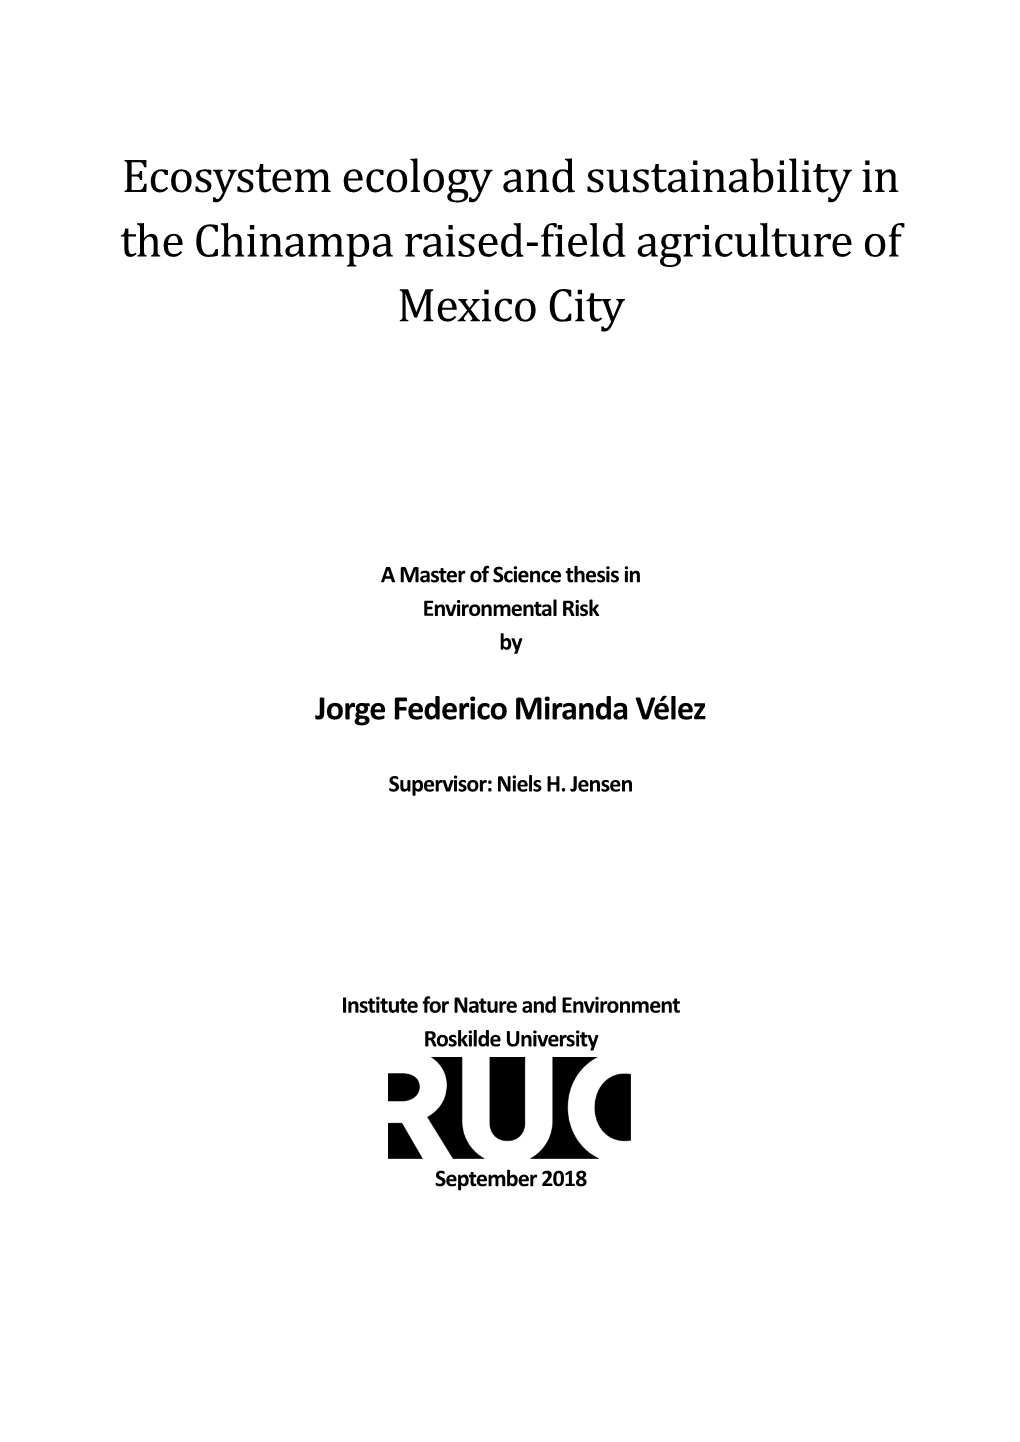 Ecosystem Ecology and Sustainability in the Chinampa Raised-Field Agriculture of Mexico City